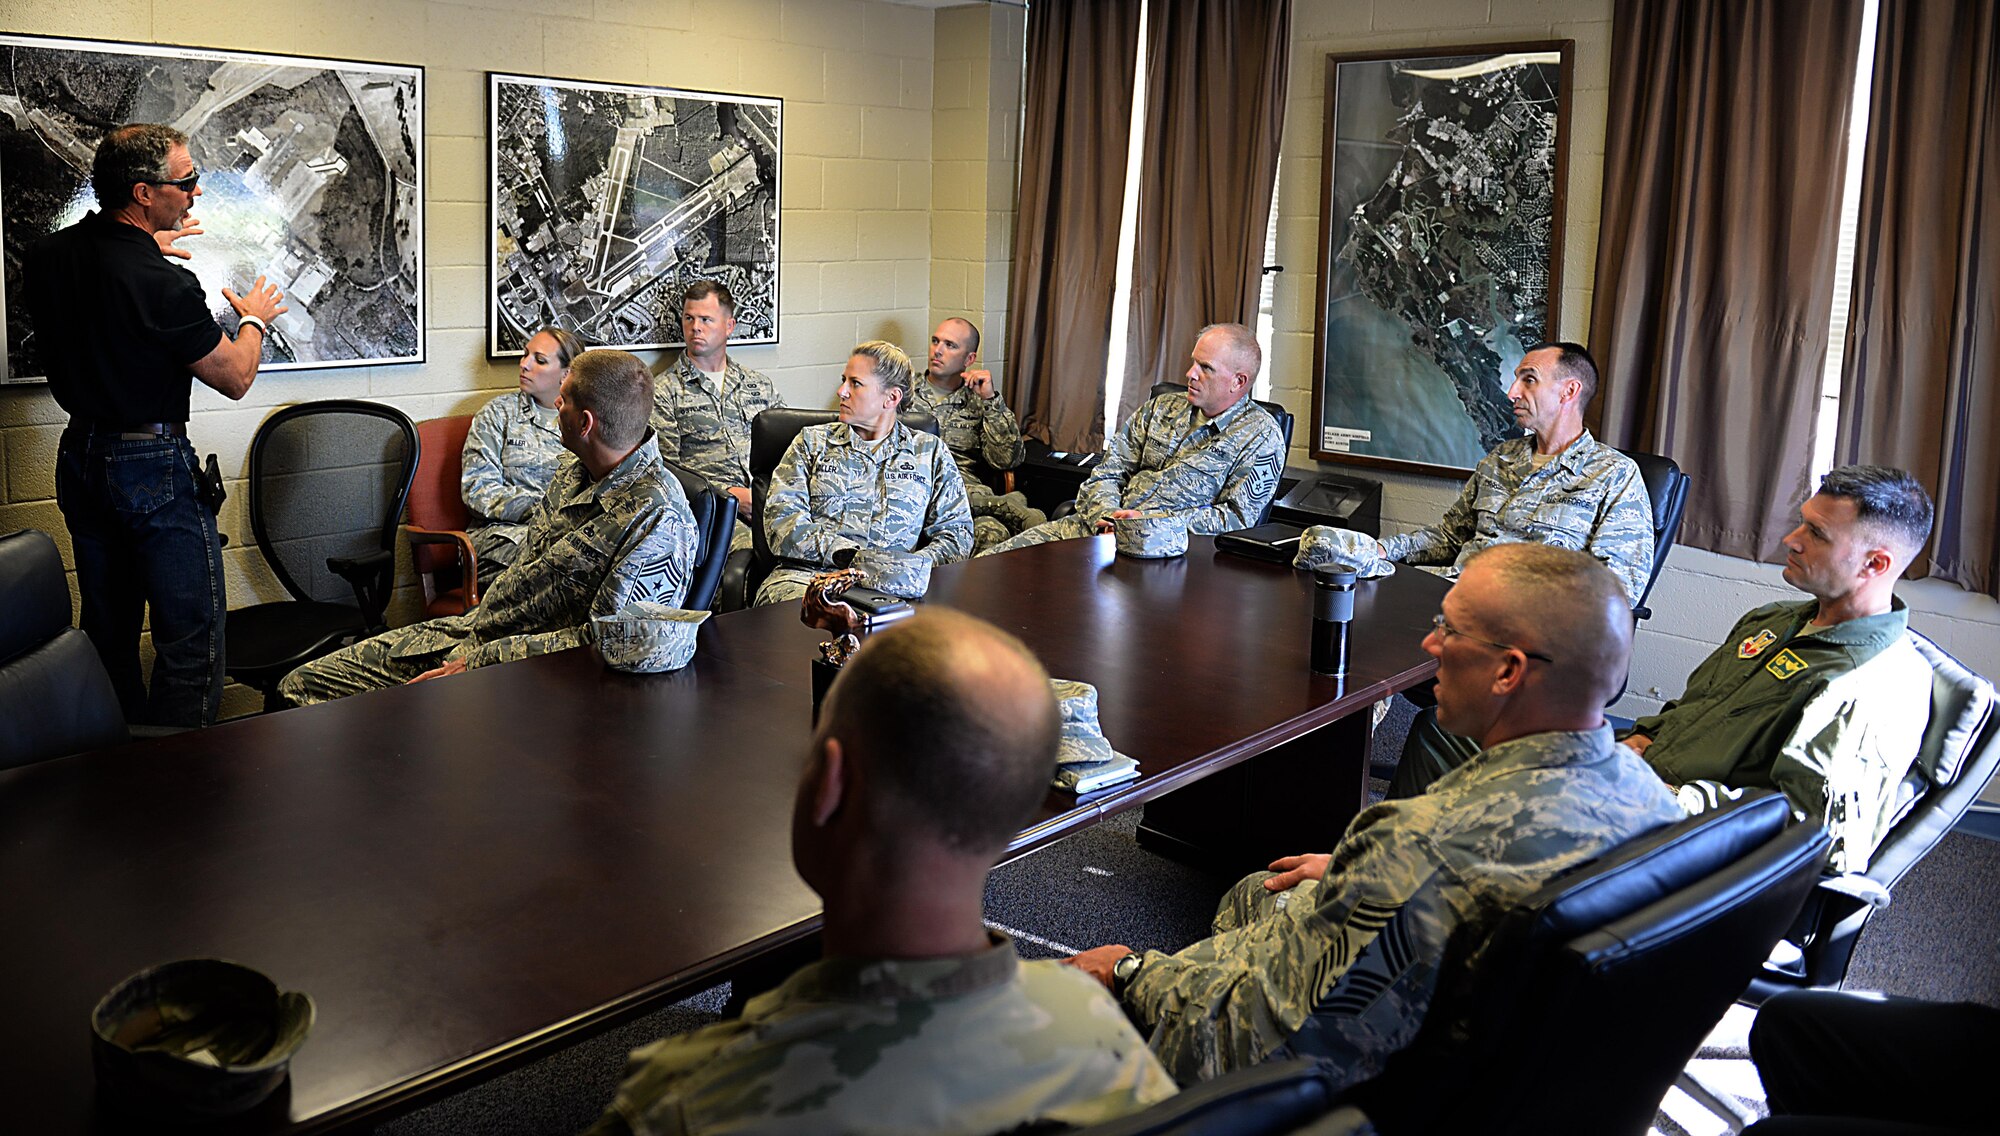 John Musser, Felker Army Airfield manager, briefs the airfield’s mission and construction plans to U.S. Air Force Maj. Gen. Scott Zobrist, 9th Air Force commander, Chief Master Sgt. Frank Batten, 9th AF command chief, and Joint Base Langley-Eustis leadership at Felker Airfield, JLBE, Va., Oct. 18. 2016. Zobrist and Batten visited various units on the joint base to gain insight on their needs to enhance mission effectiveness. (U.S. Air Force photo by Staff Sgt. Teresa J. Cleveland)